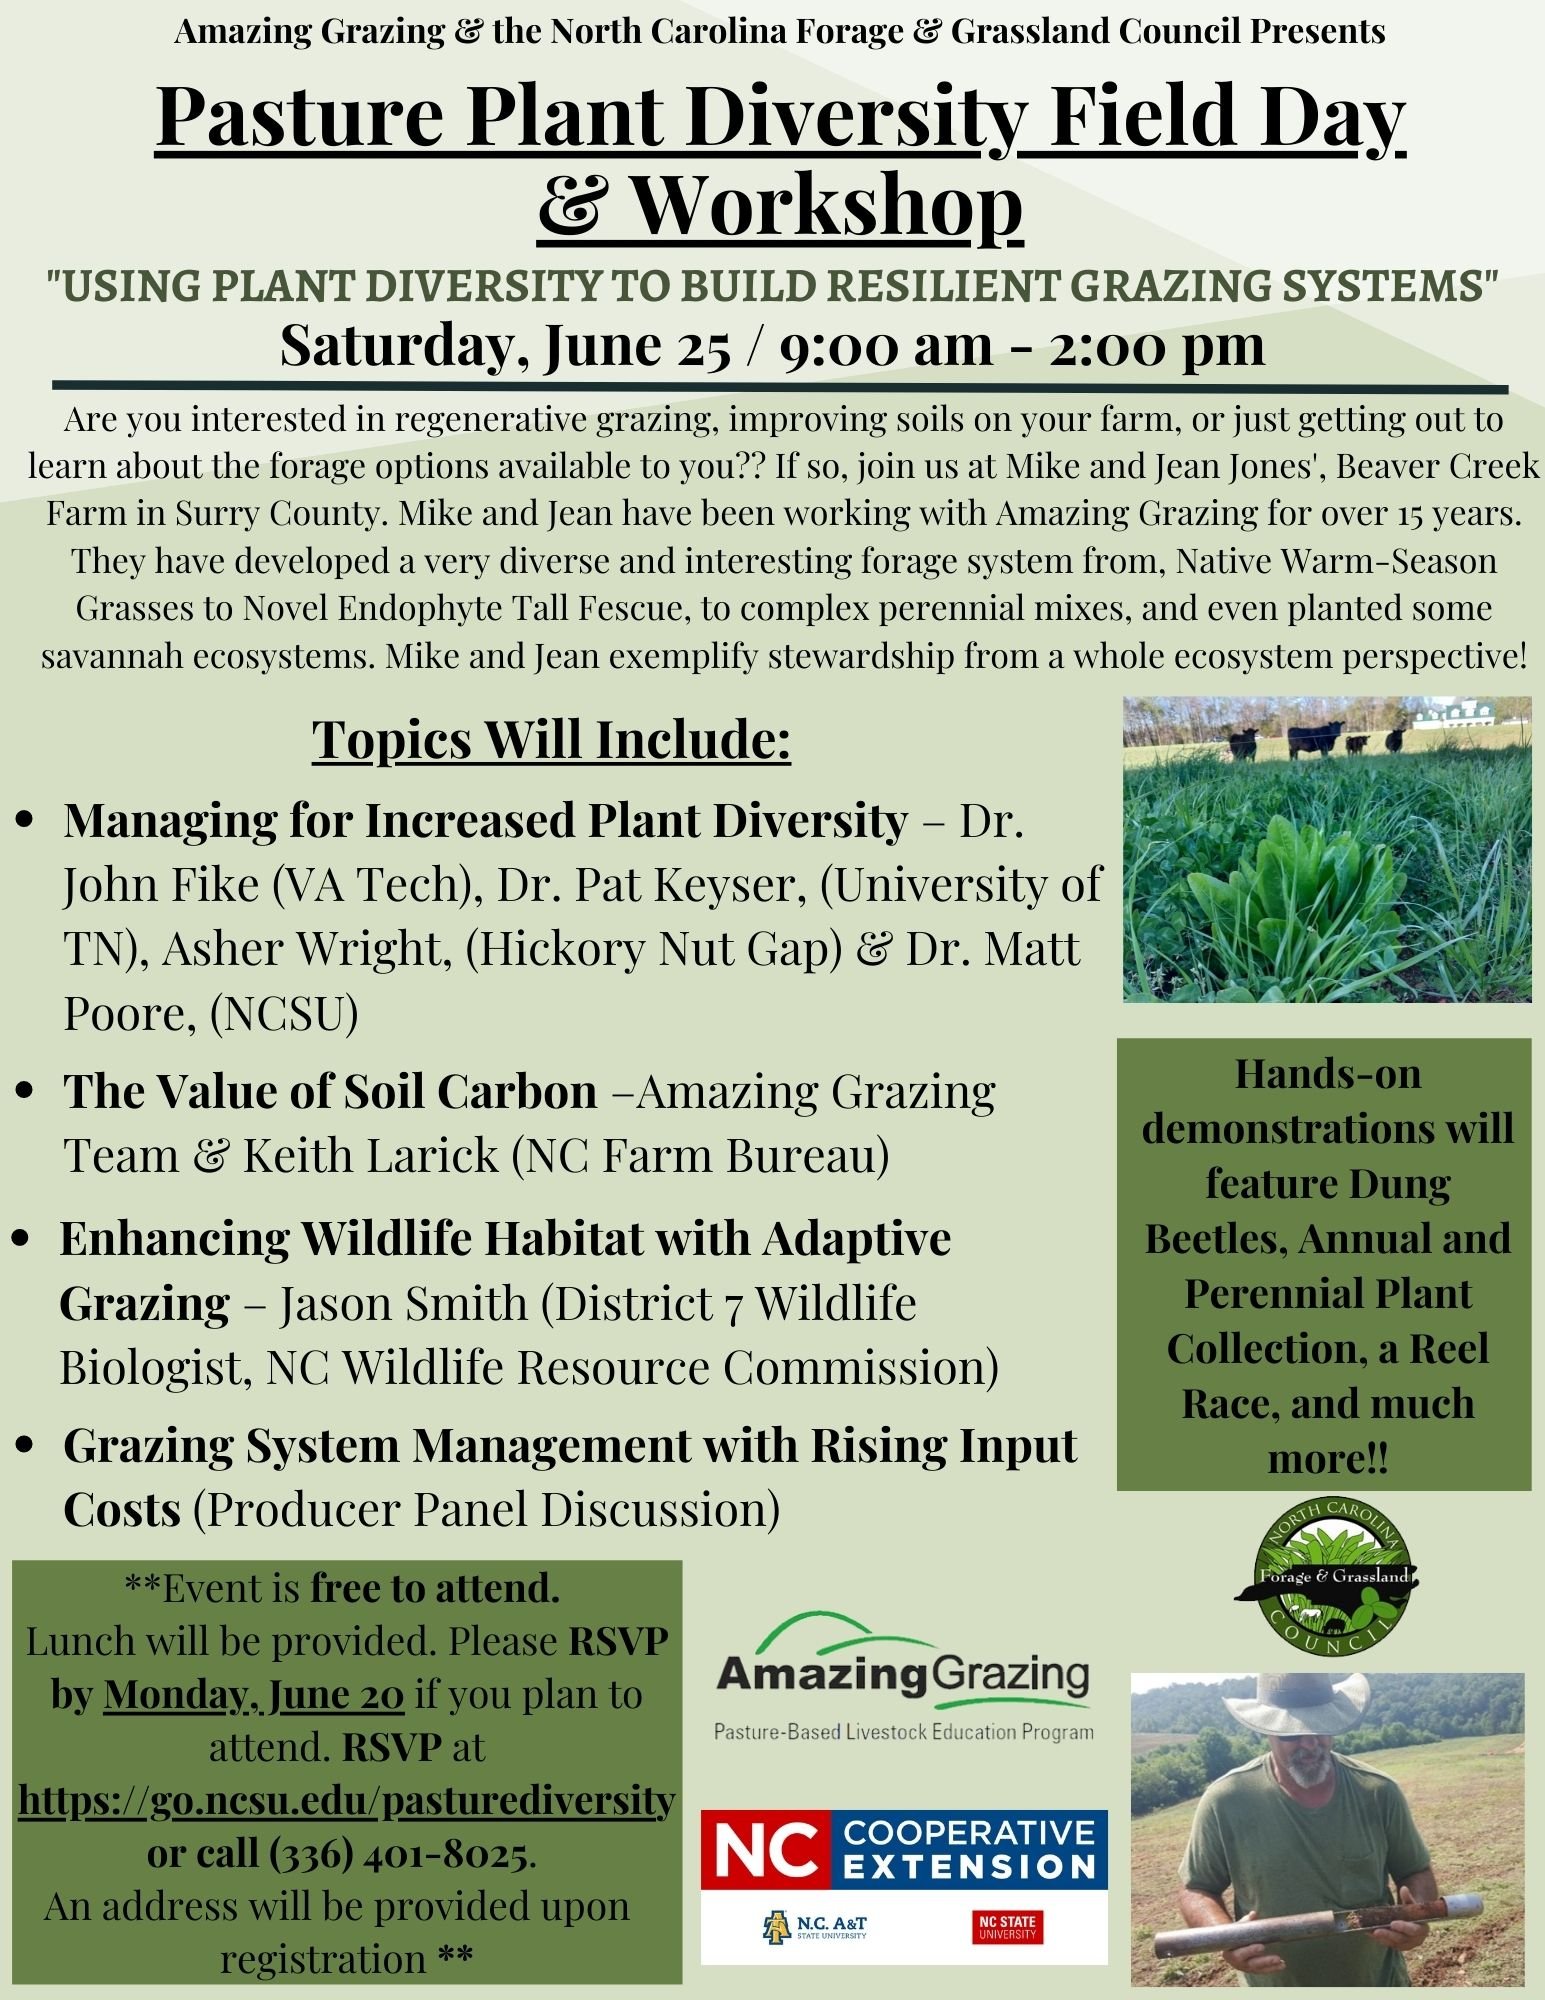 A flyer for the Pasture and Plant Diversity Field Day and Workshop.